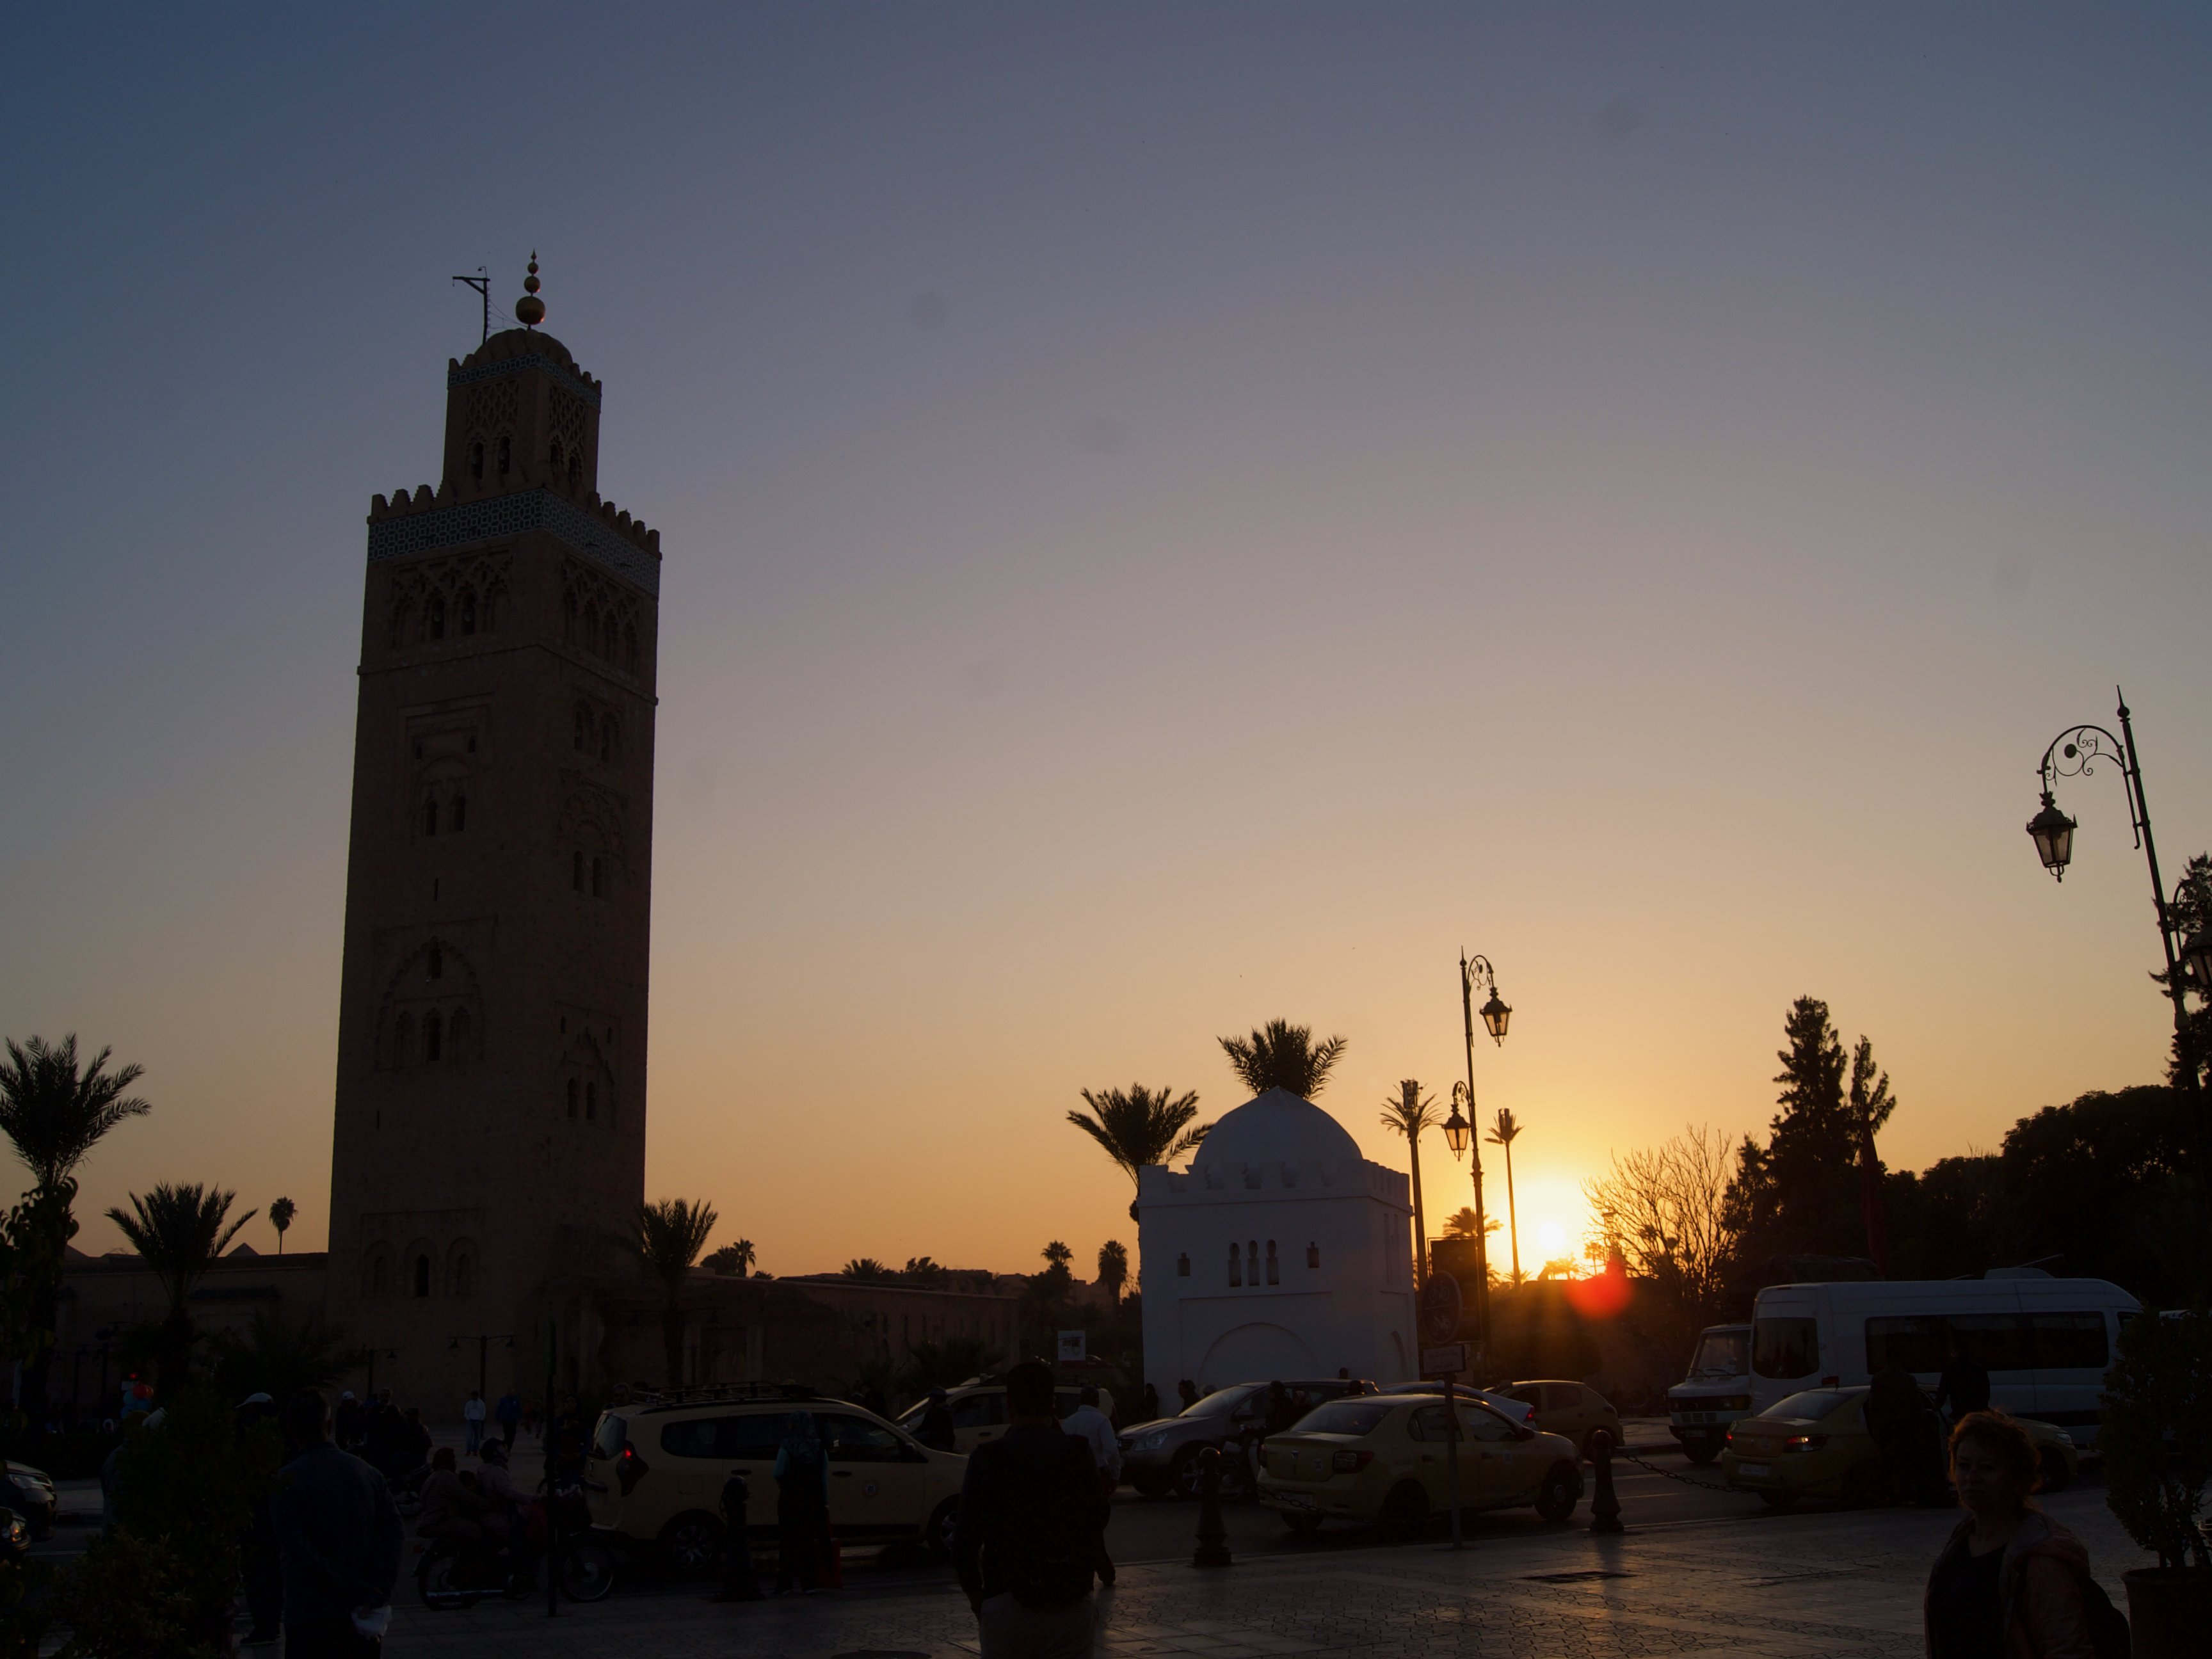 View of the Koutoubia Mosque